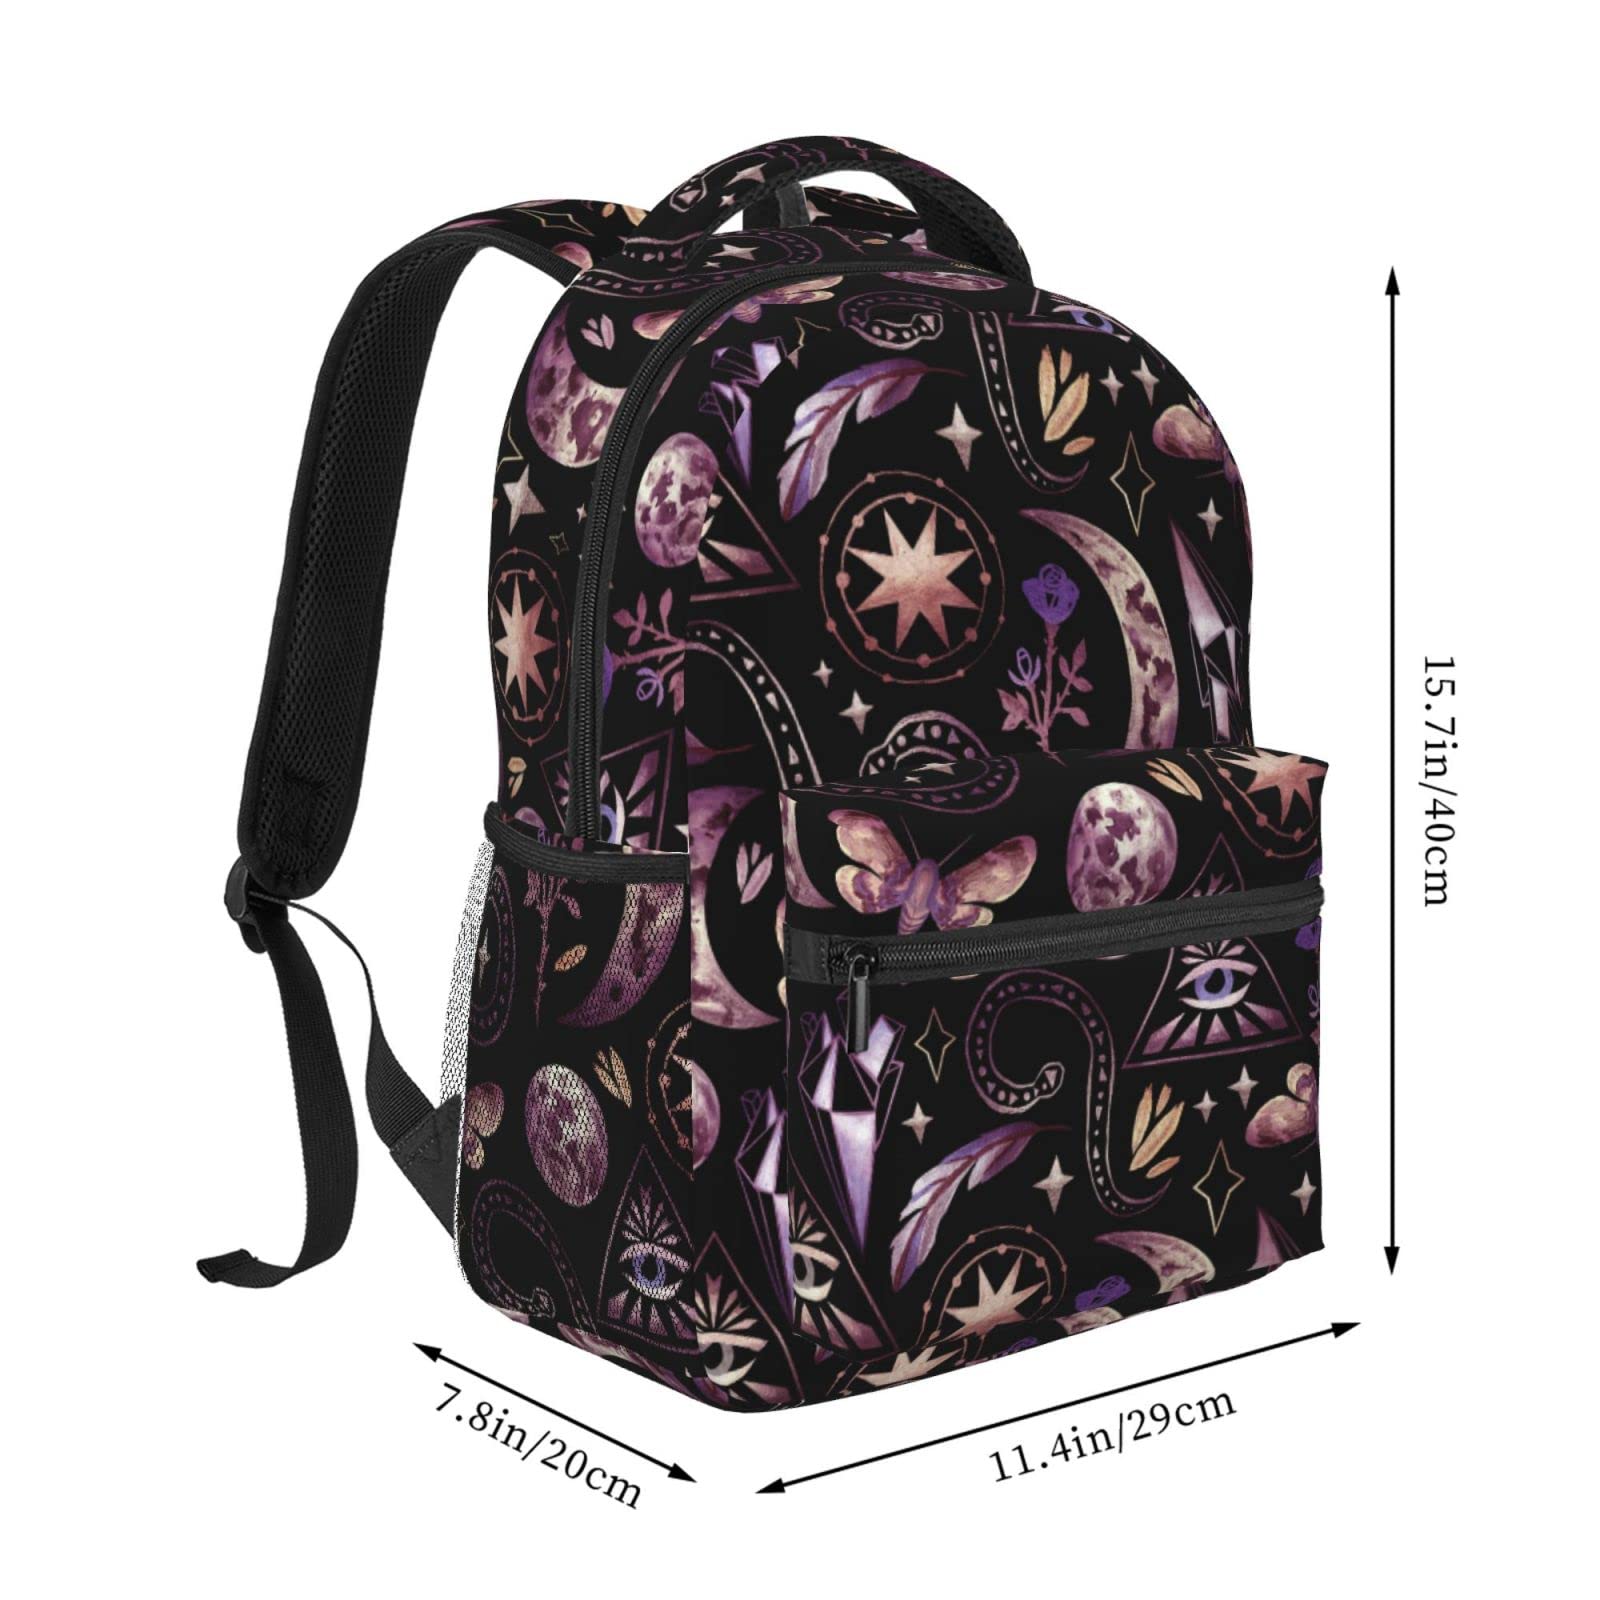 DADABULIU School Backpack Tarot Moon Butterfly Magic Goth for Women Girl Student Bookbag Durable Casual Daypack Teens College Lightweight Hiking Travel Bag Over 3 Years Old